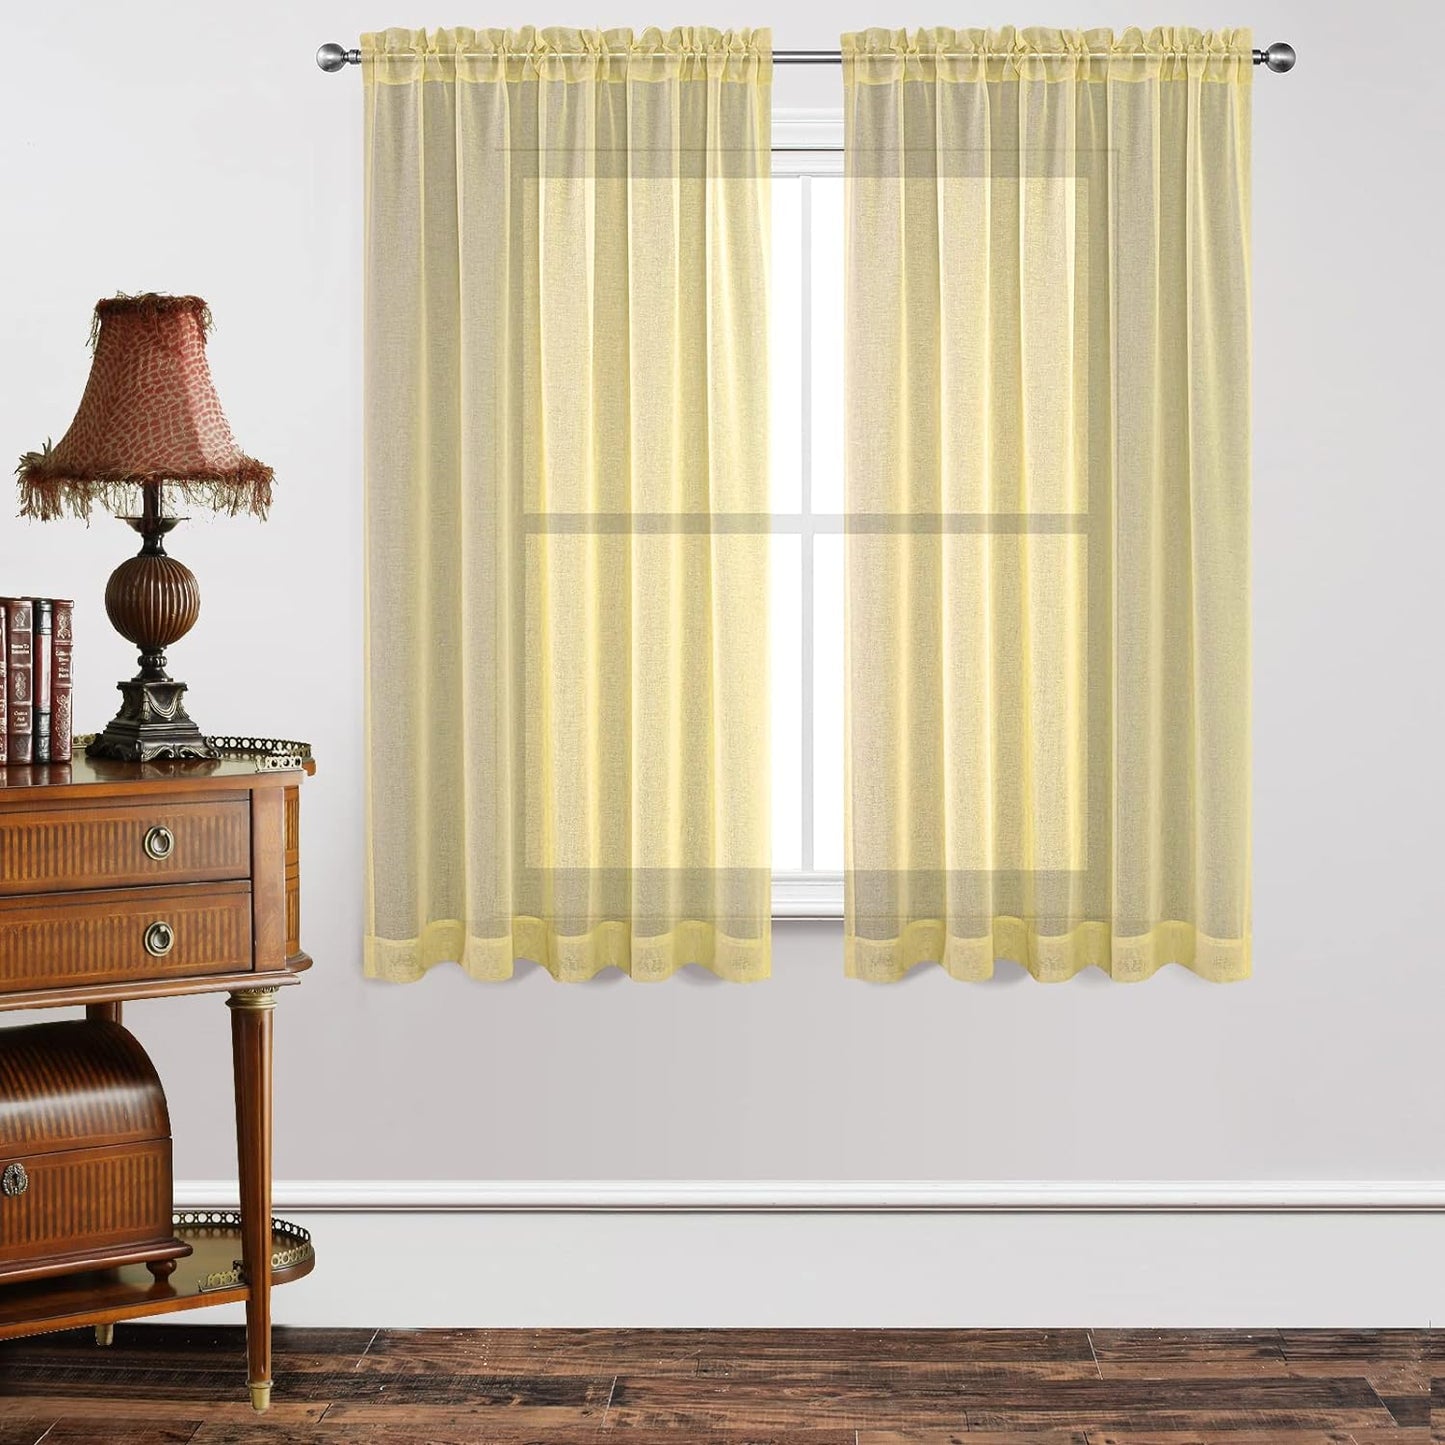 Joydeco White Sheer Curtains 63 Inch Length 2 Panels Set, Rod Pocket Long Sheer Curtains for Window Bedroom Living Room, Lightweight Semi Drape Panels for Yard Patio (54X63 Inch, off White)  Joydeco Yellow 54W X 63L Inch X 2 Panels 